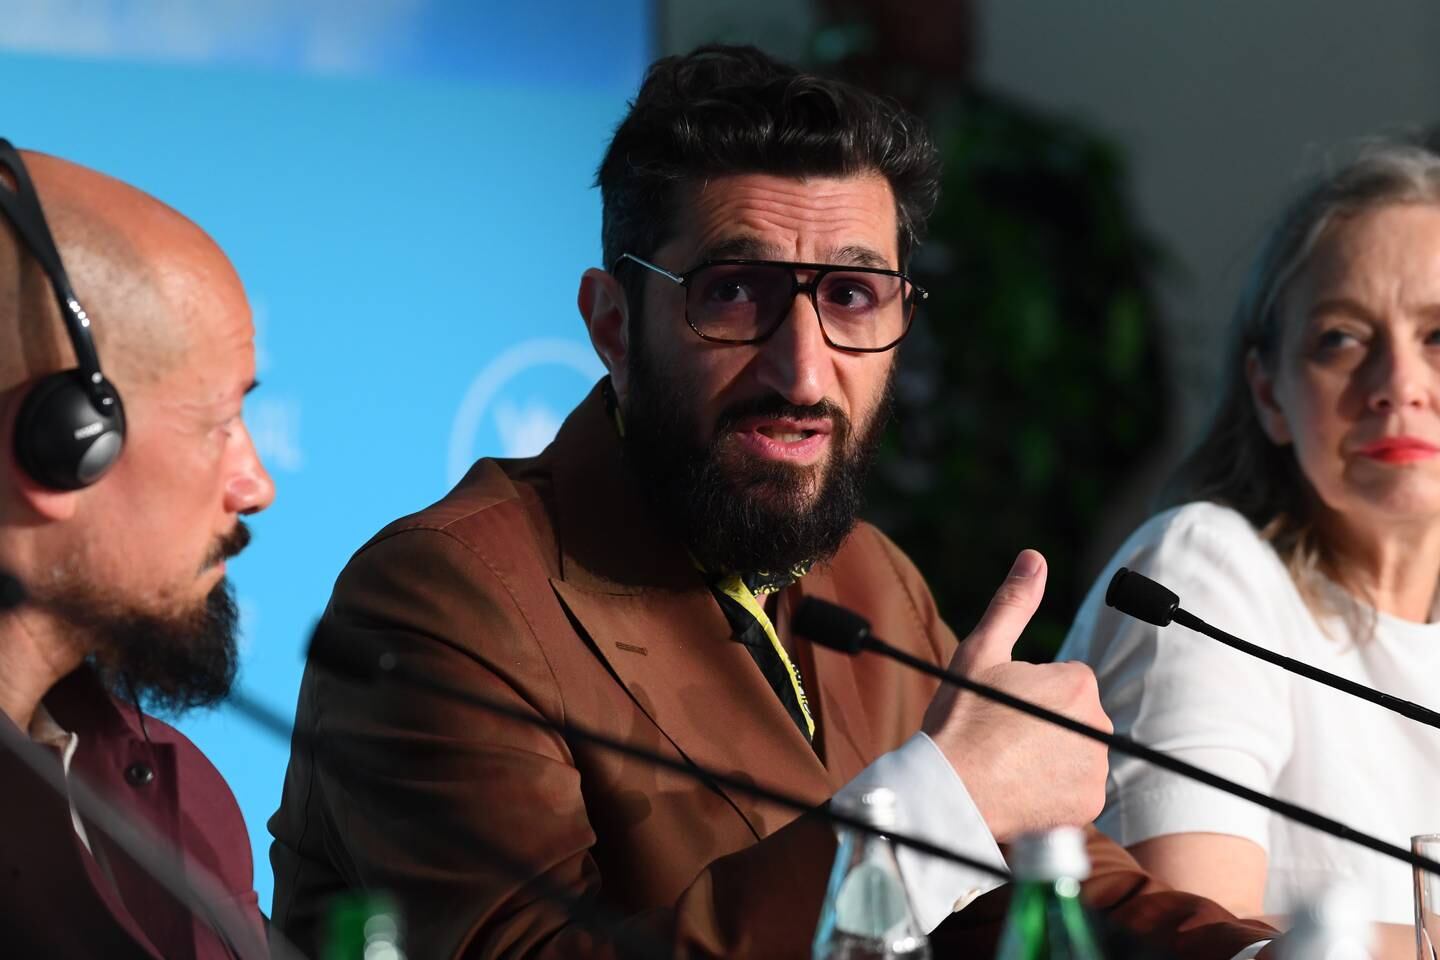 Tarik Saleh, left, and Fares Fares, centre, attend the press conference for 'Boy from Heaven' during the 75th Cannes Film Festival at Palais des Festivals. EPA